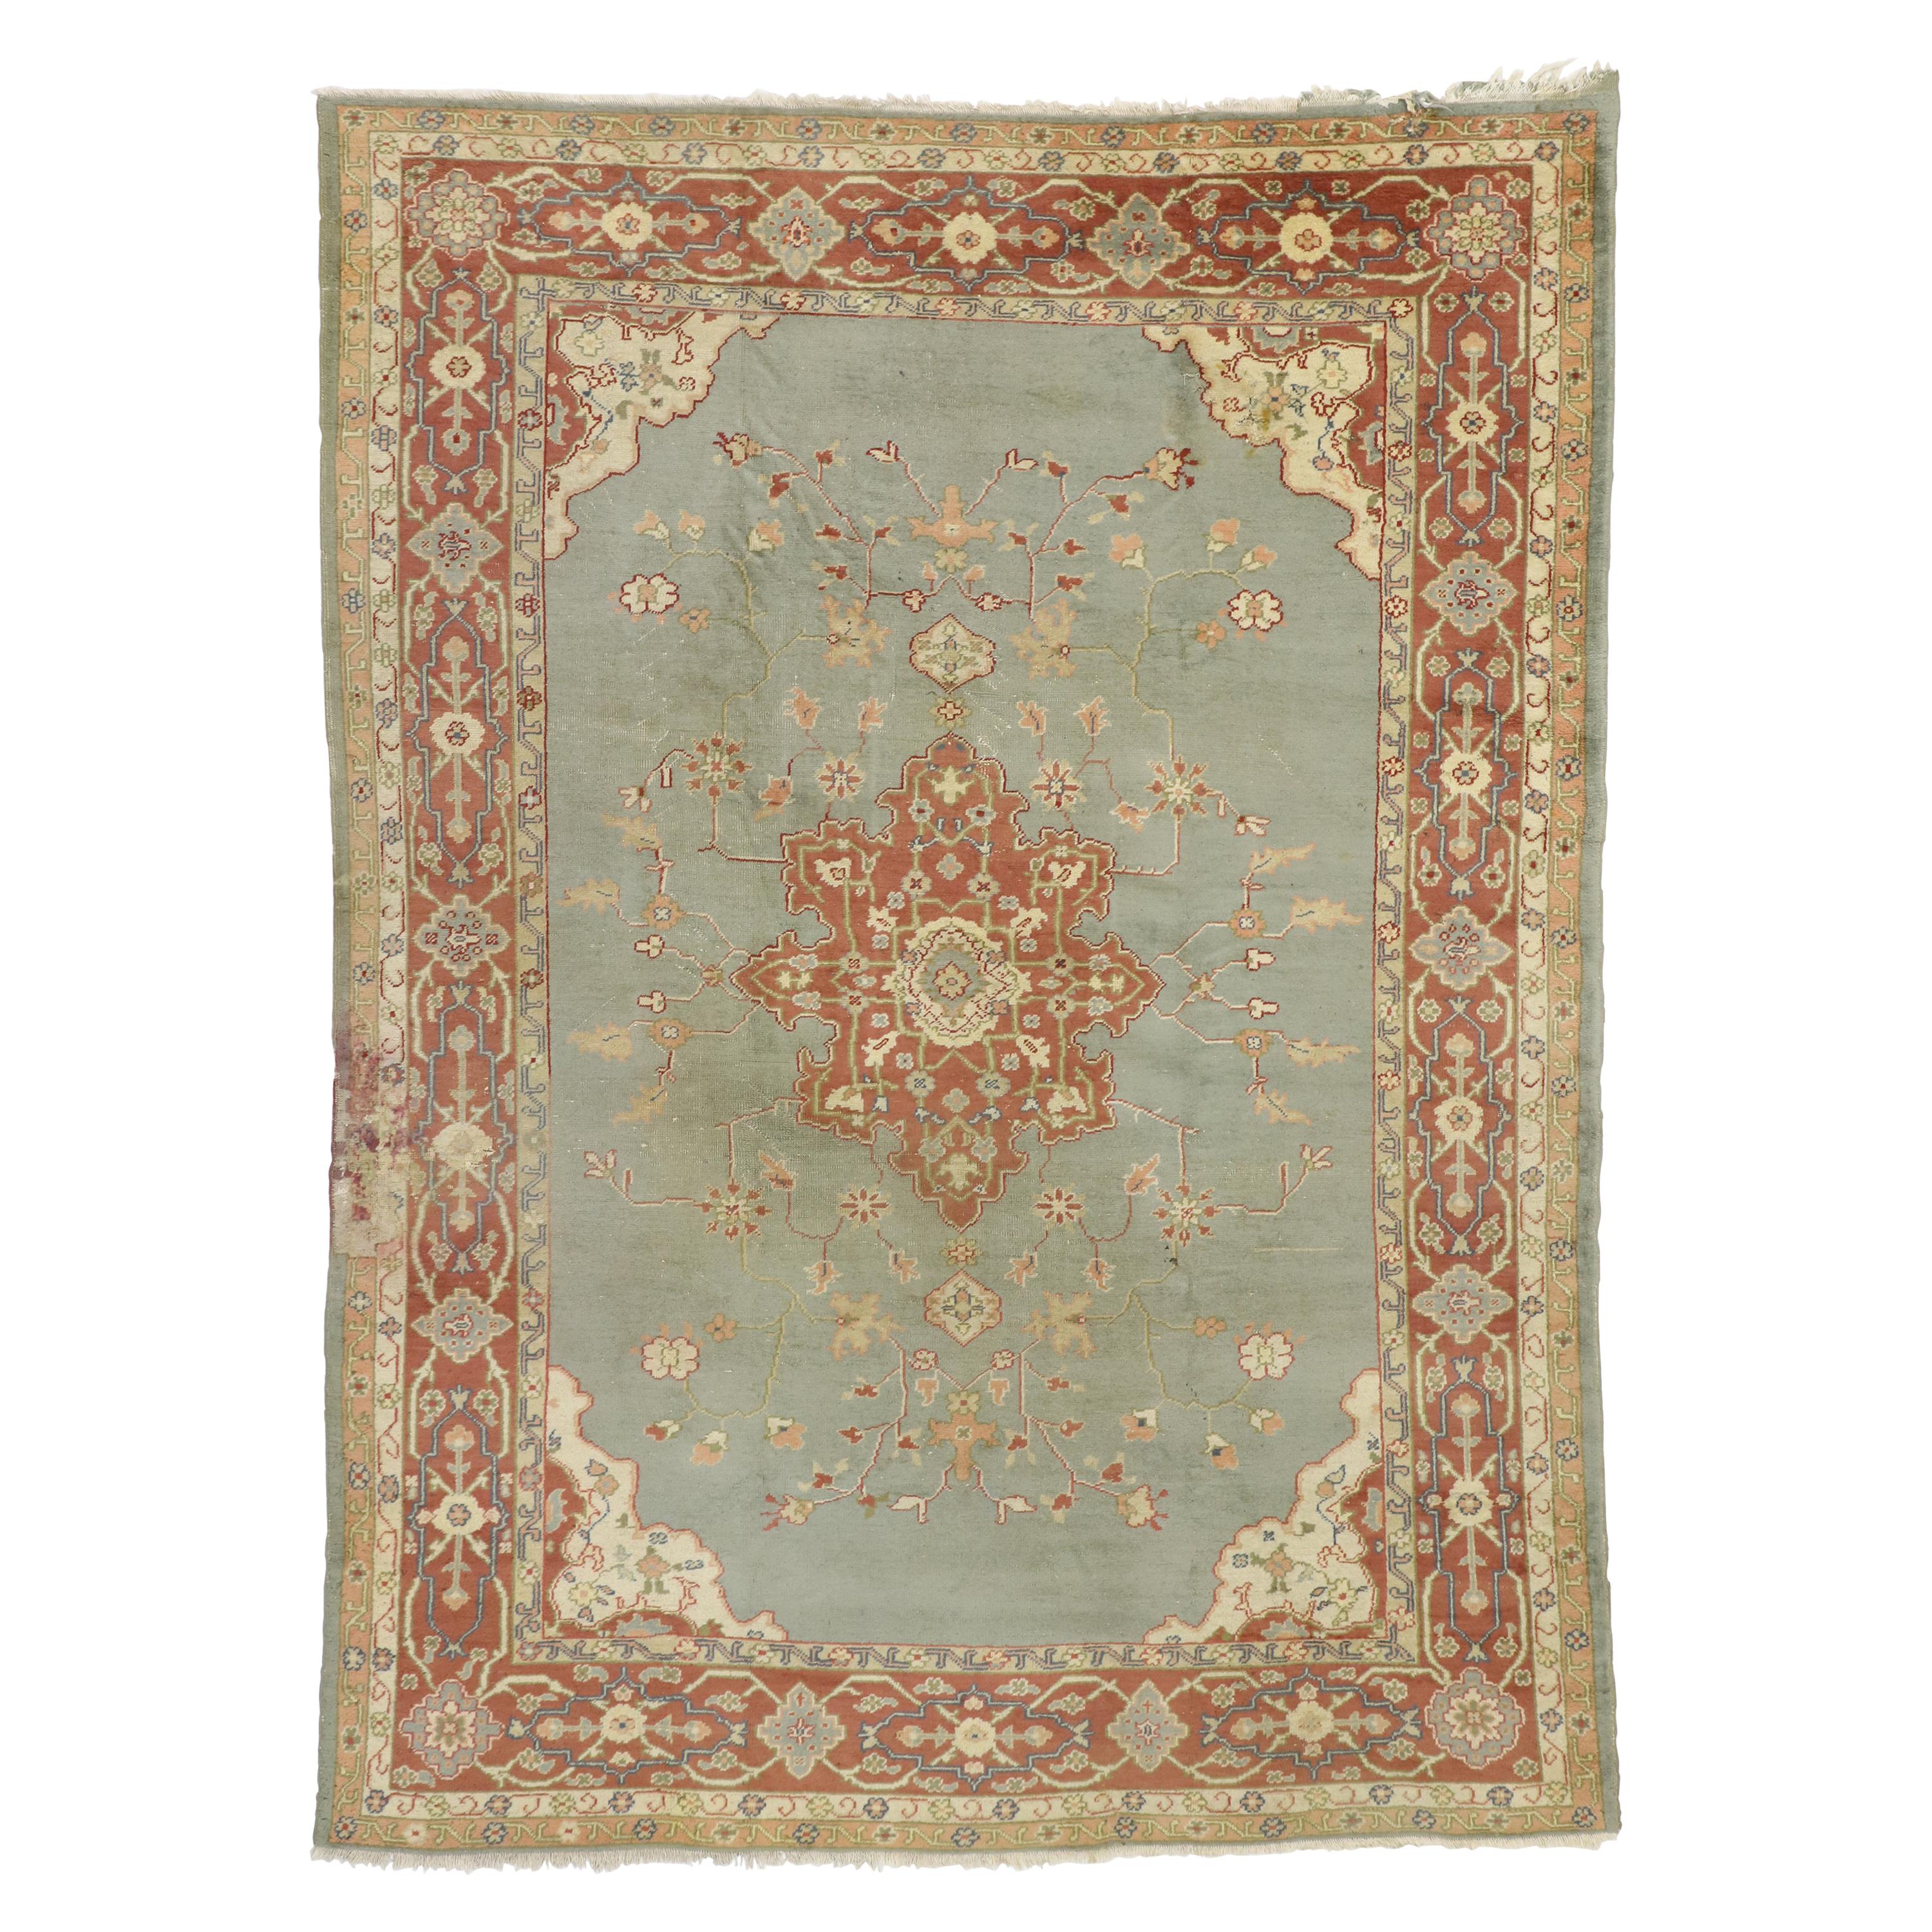 Distressed Antique Turkish Oushak Rug with Rustic Georgian Arts & Crafts Style